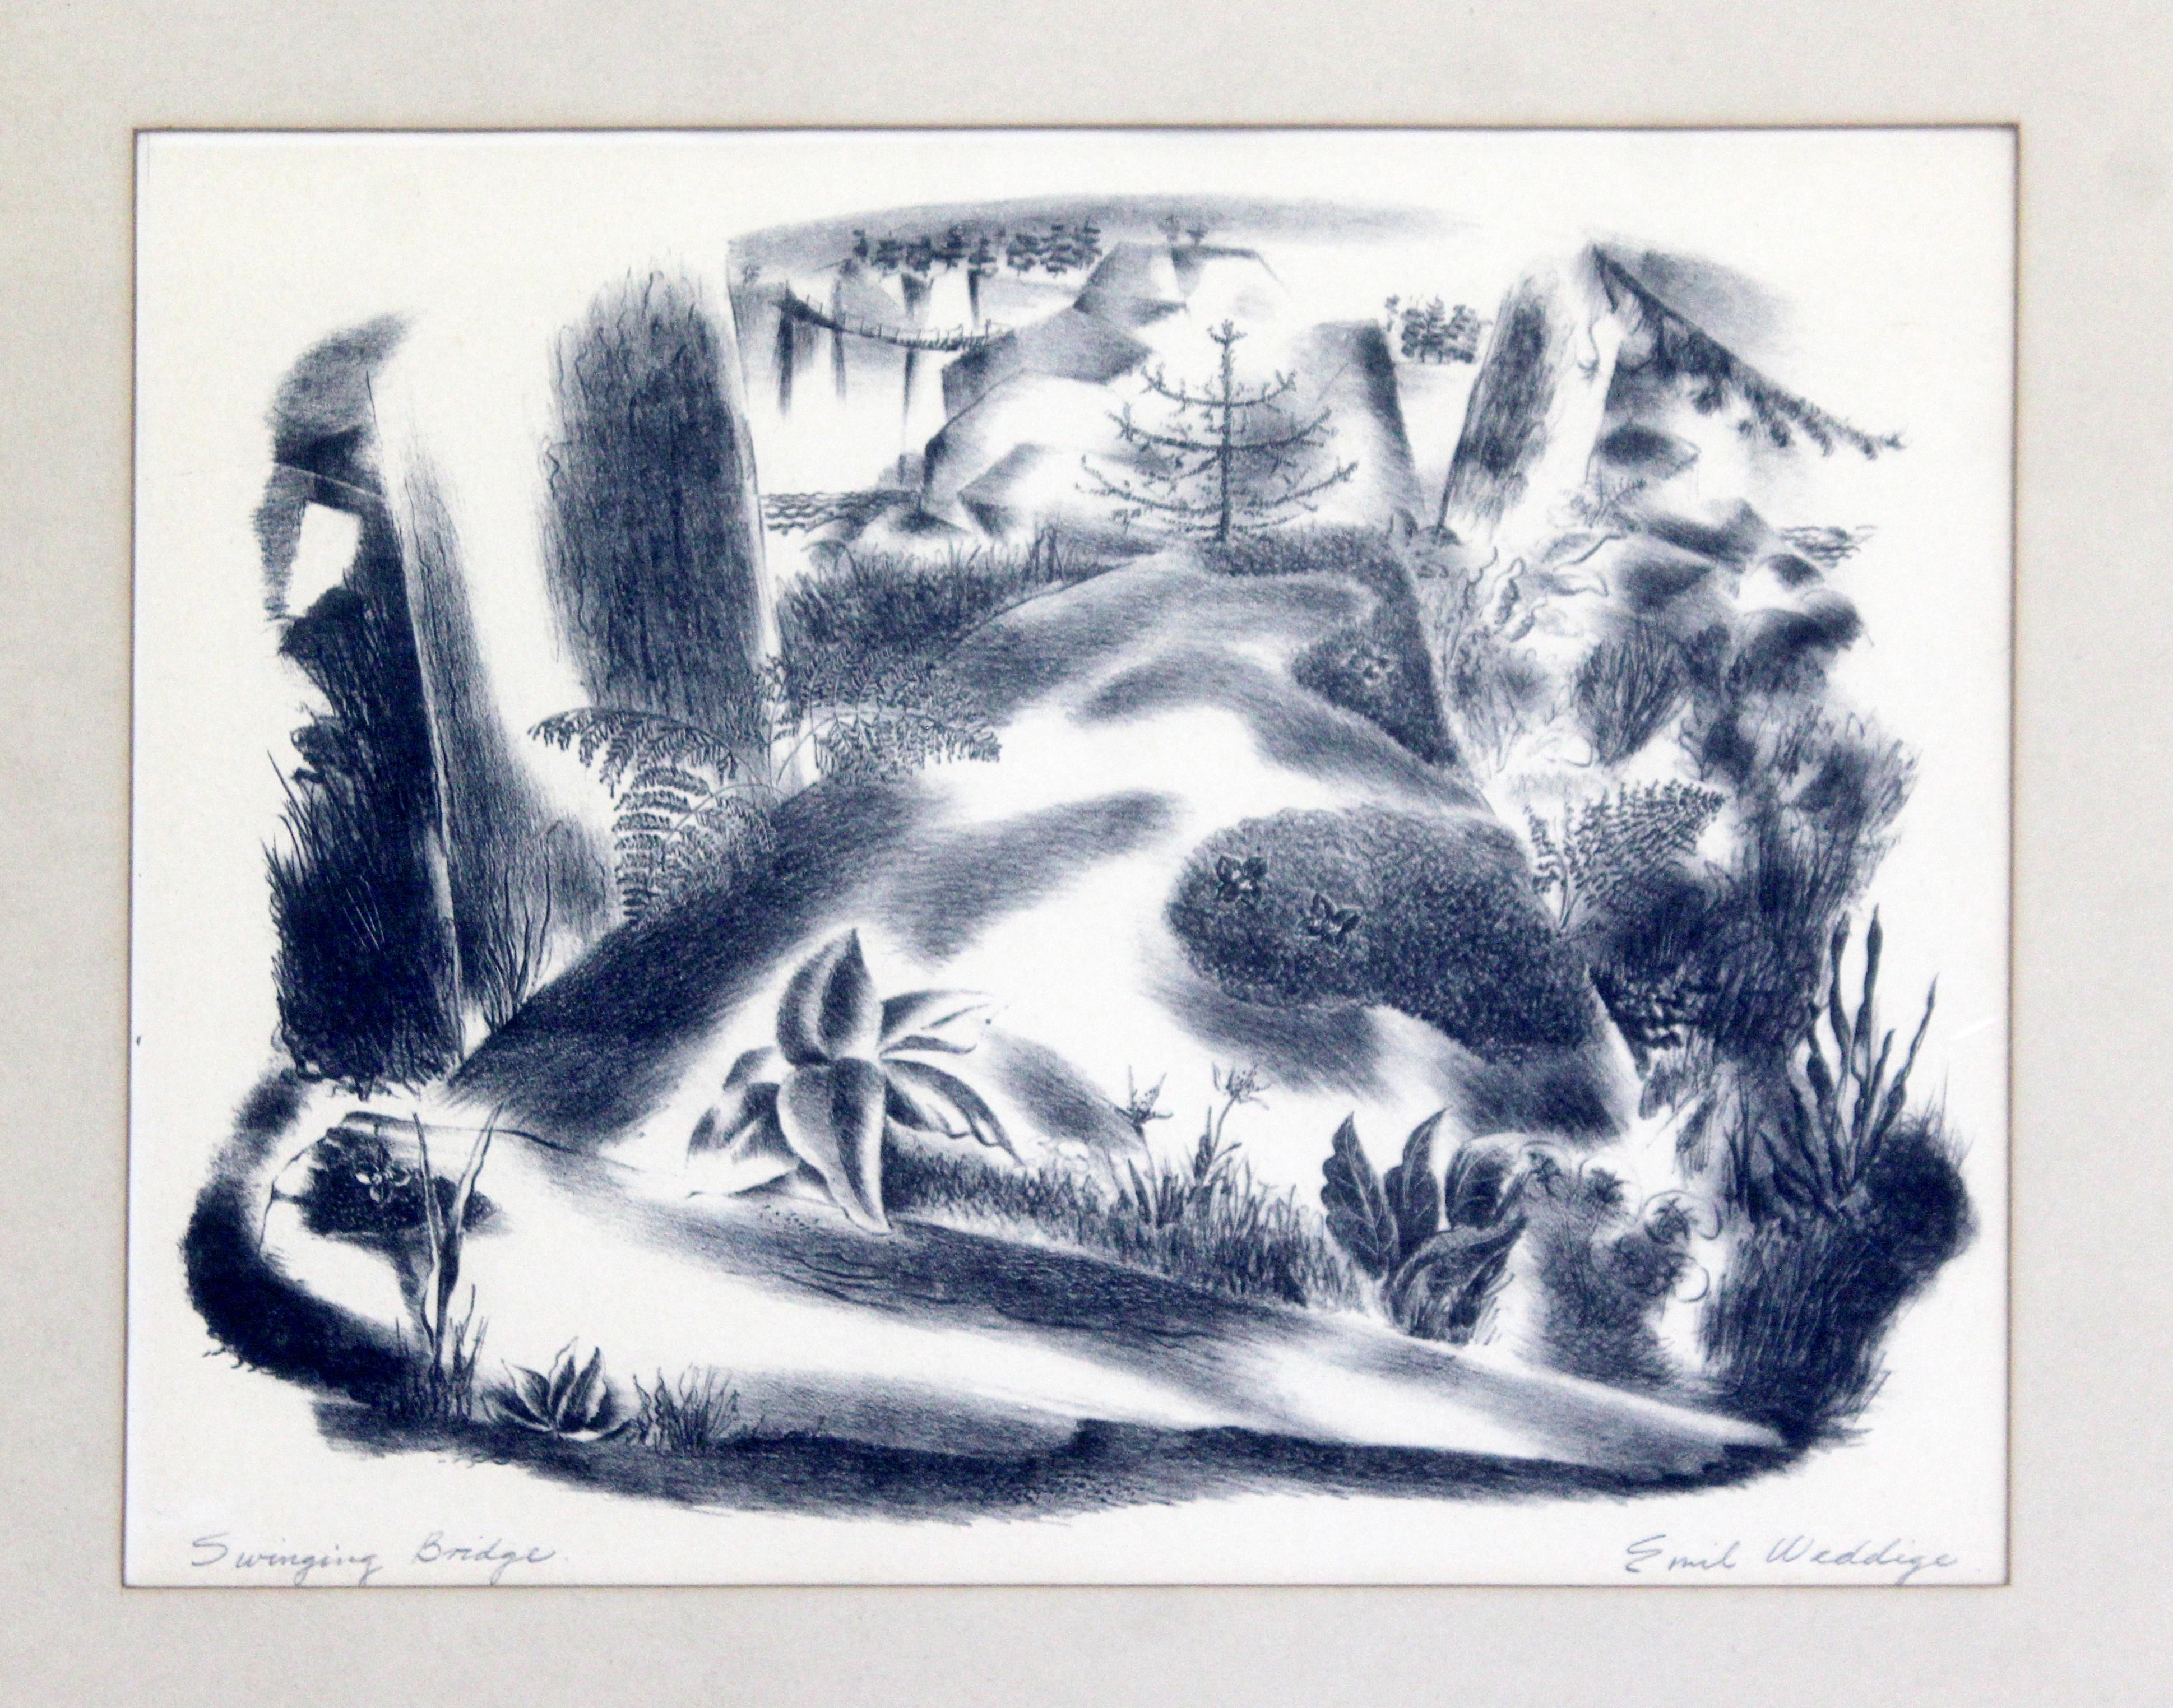 For your consideration is a great, signed and numbered lithograph by Emil Weddige, entitled 